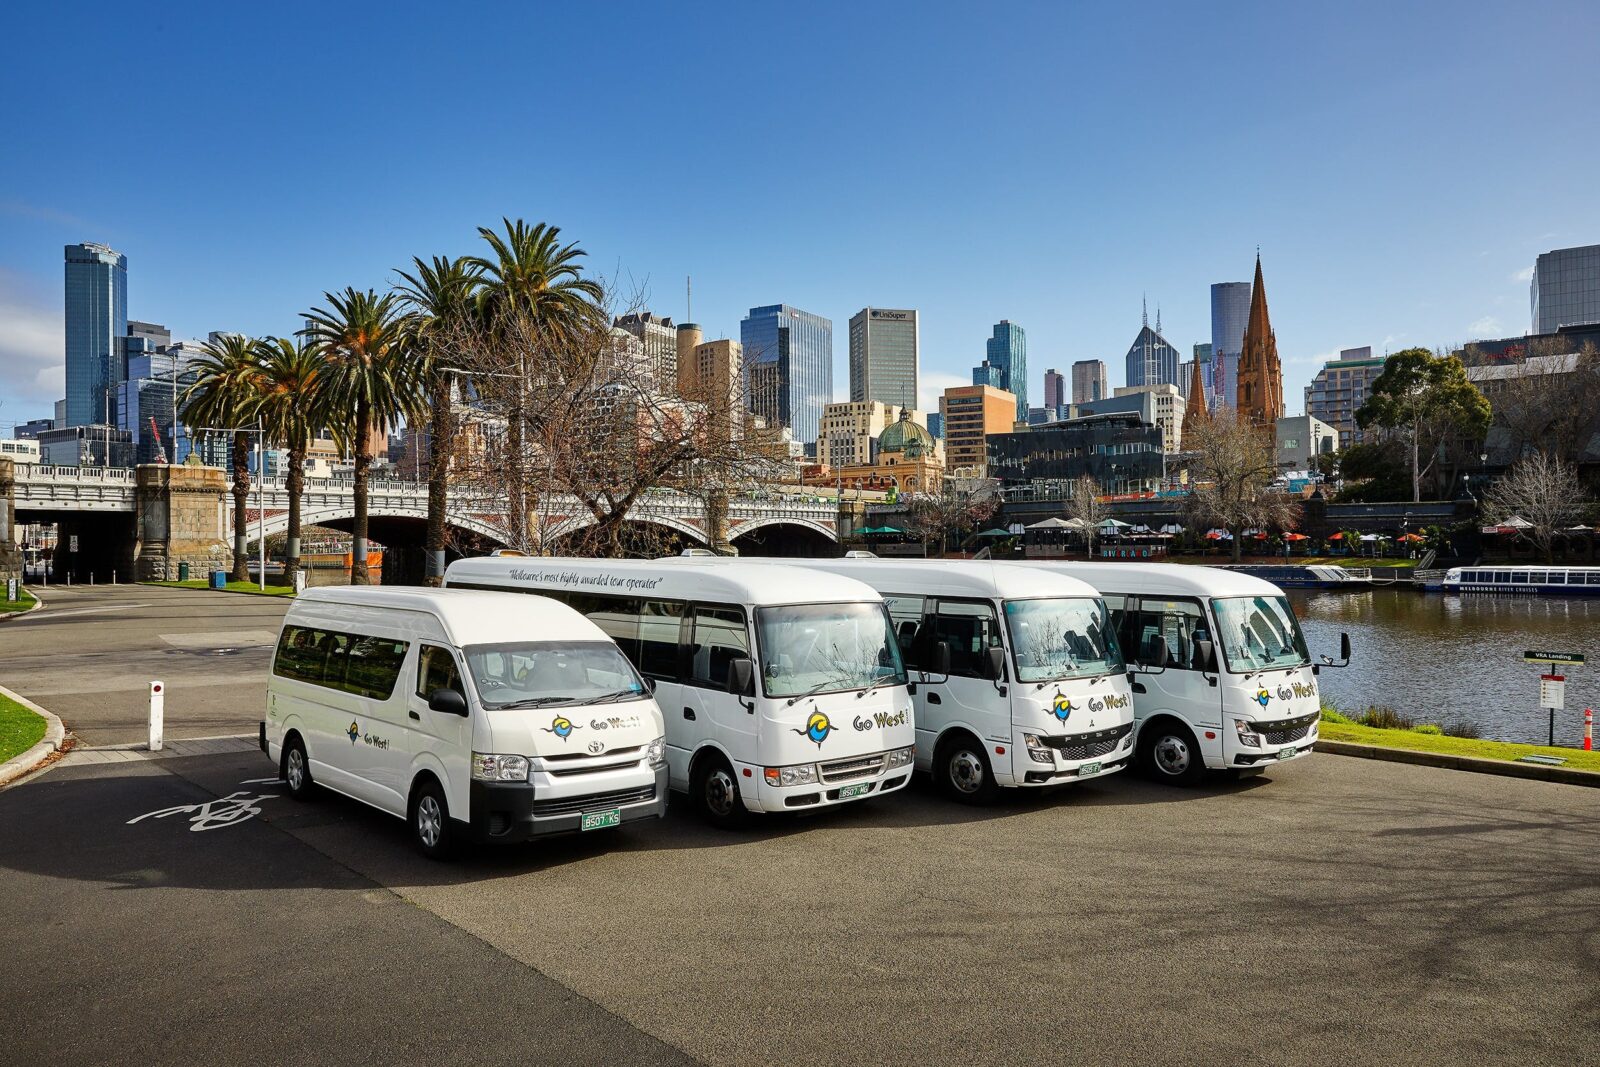 Go West Tours fleet consists of small group touring vehicles